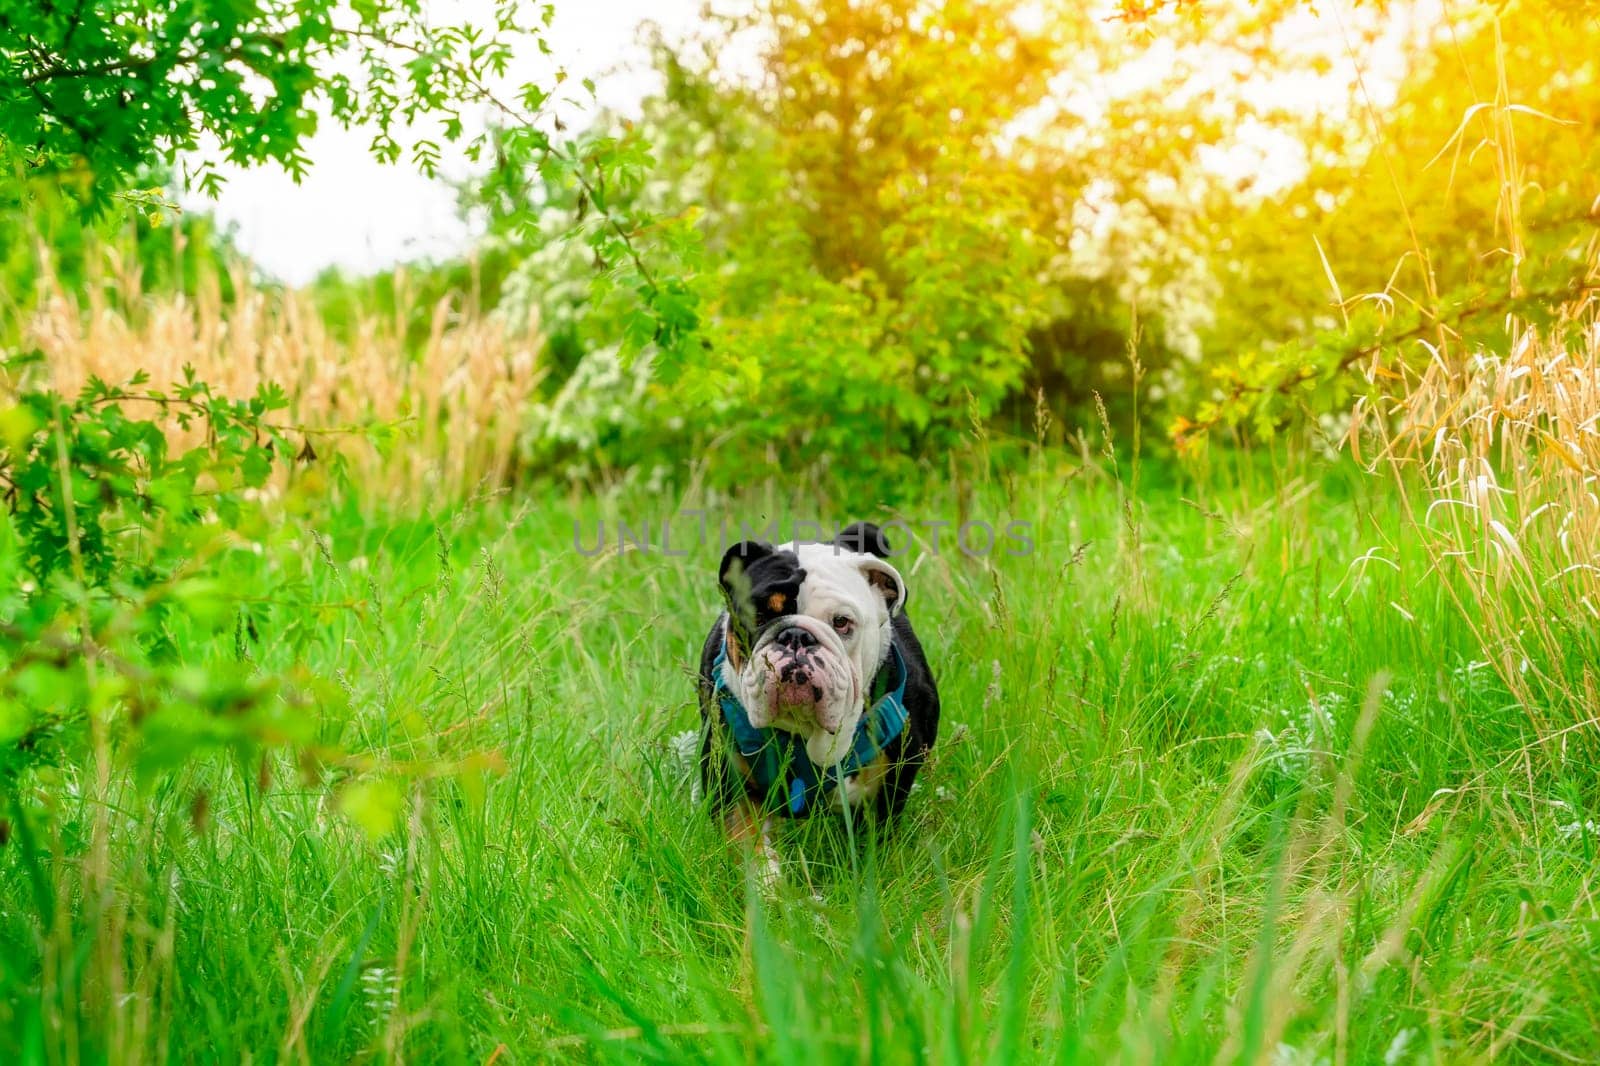 Black tri-color funny sad English British Bulldog Dog out for a walk looking up sitting in the grass in forest on Autumn sunny day at sunset